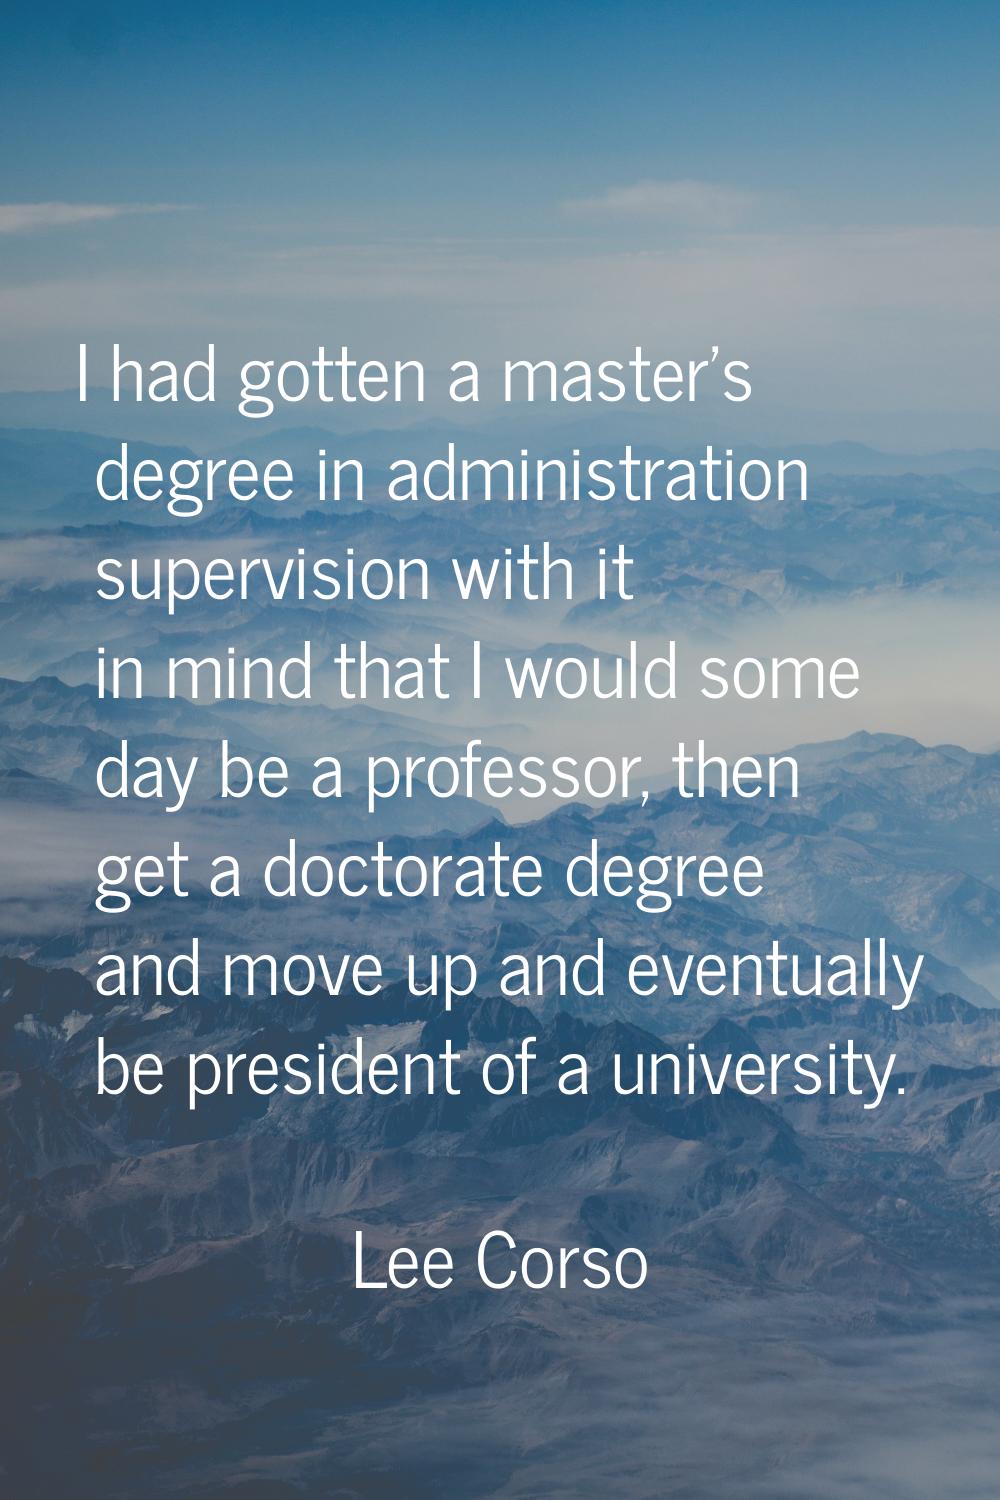 I had gotten a master's degree in administration supervision with it in mind that I would some day 